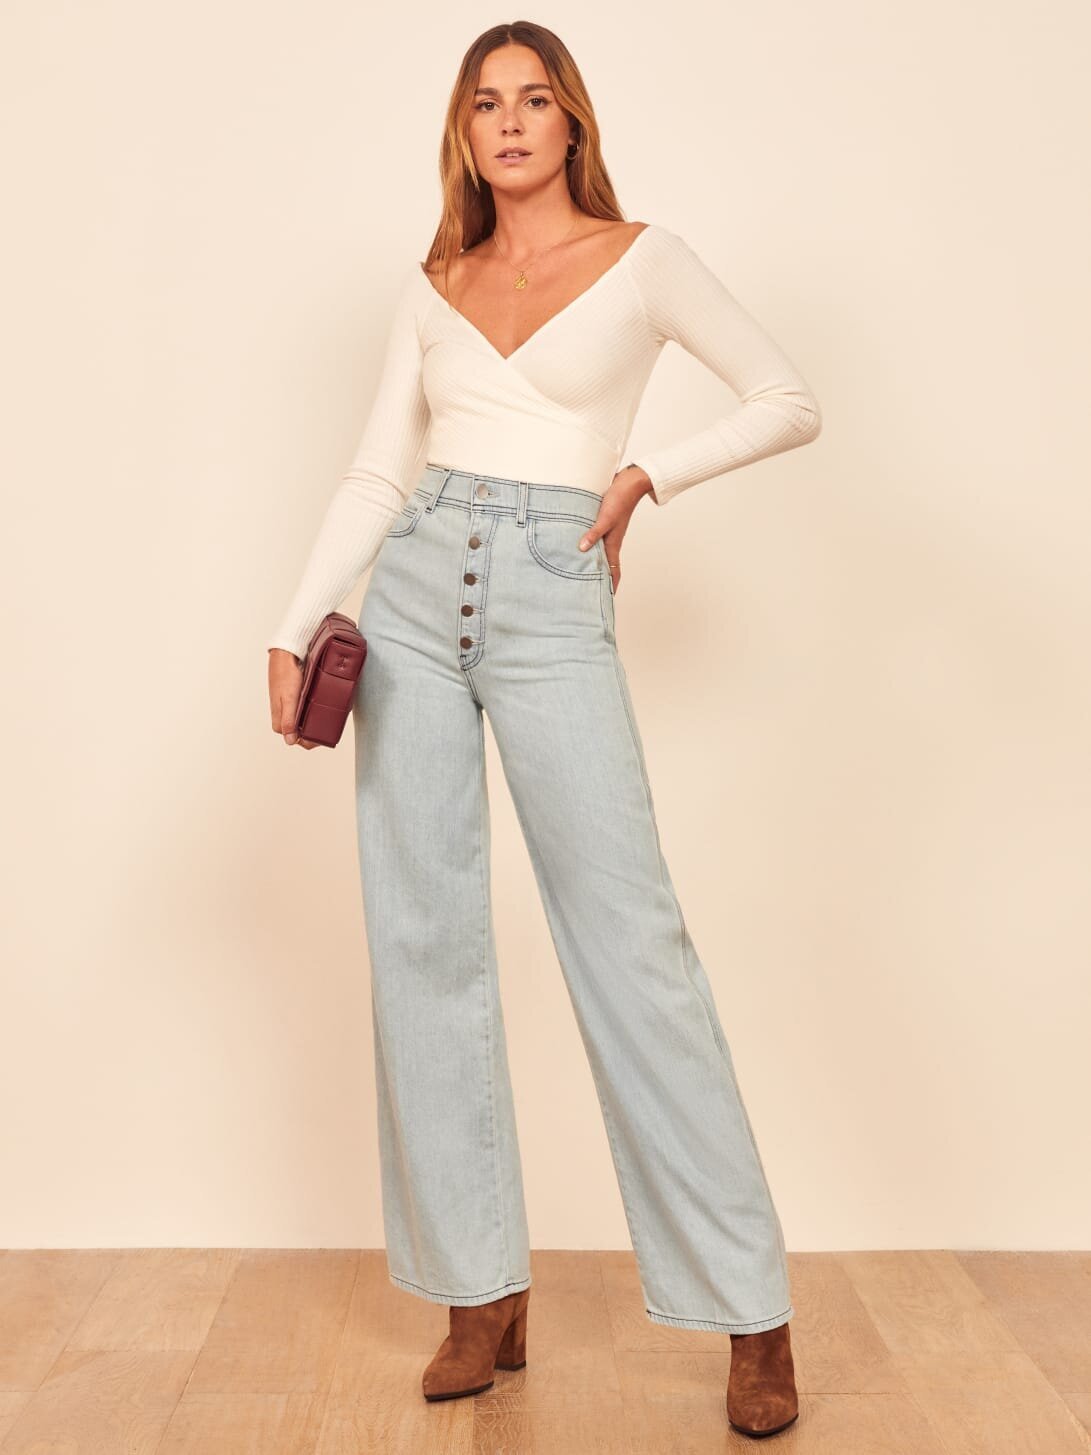 flares back in fashion 2019